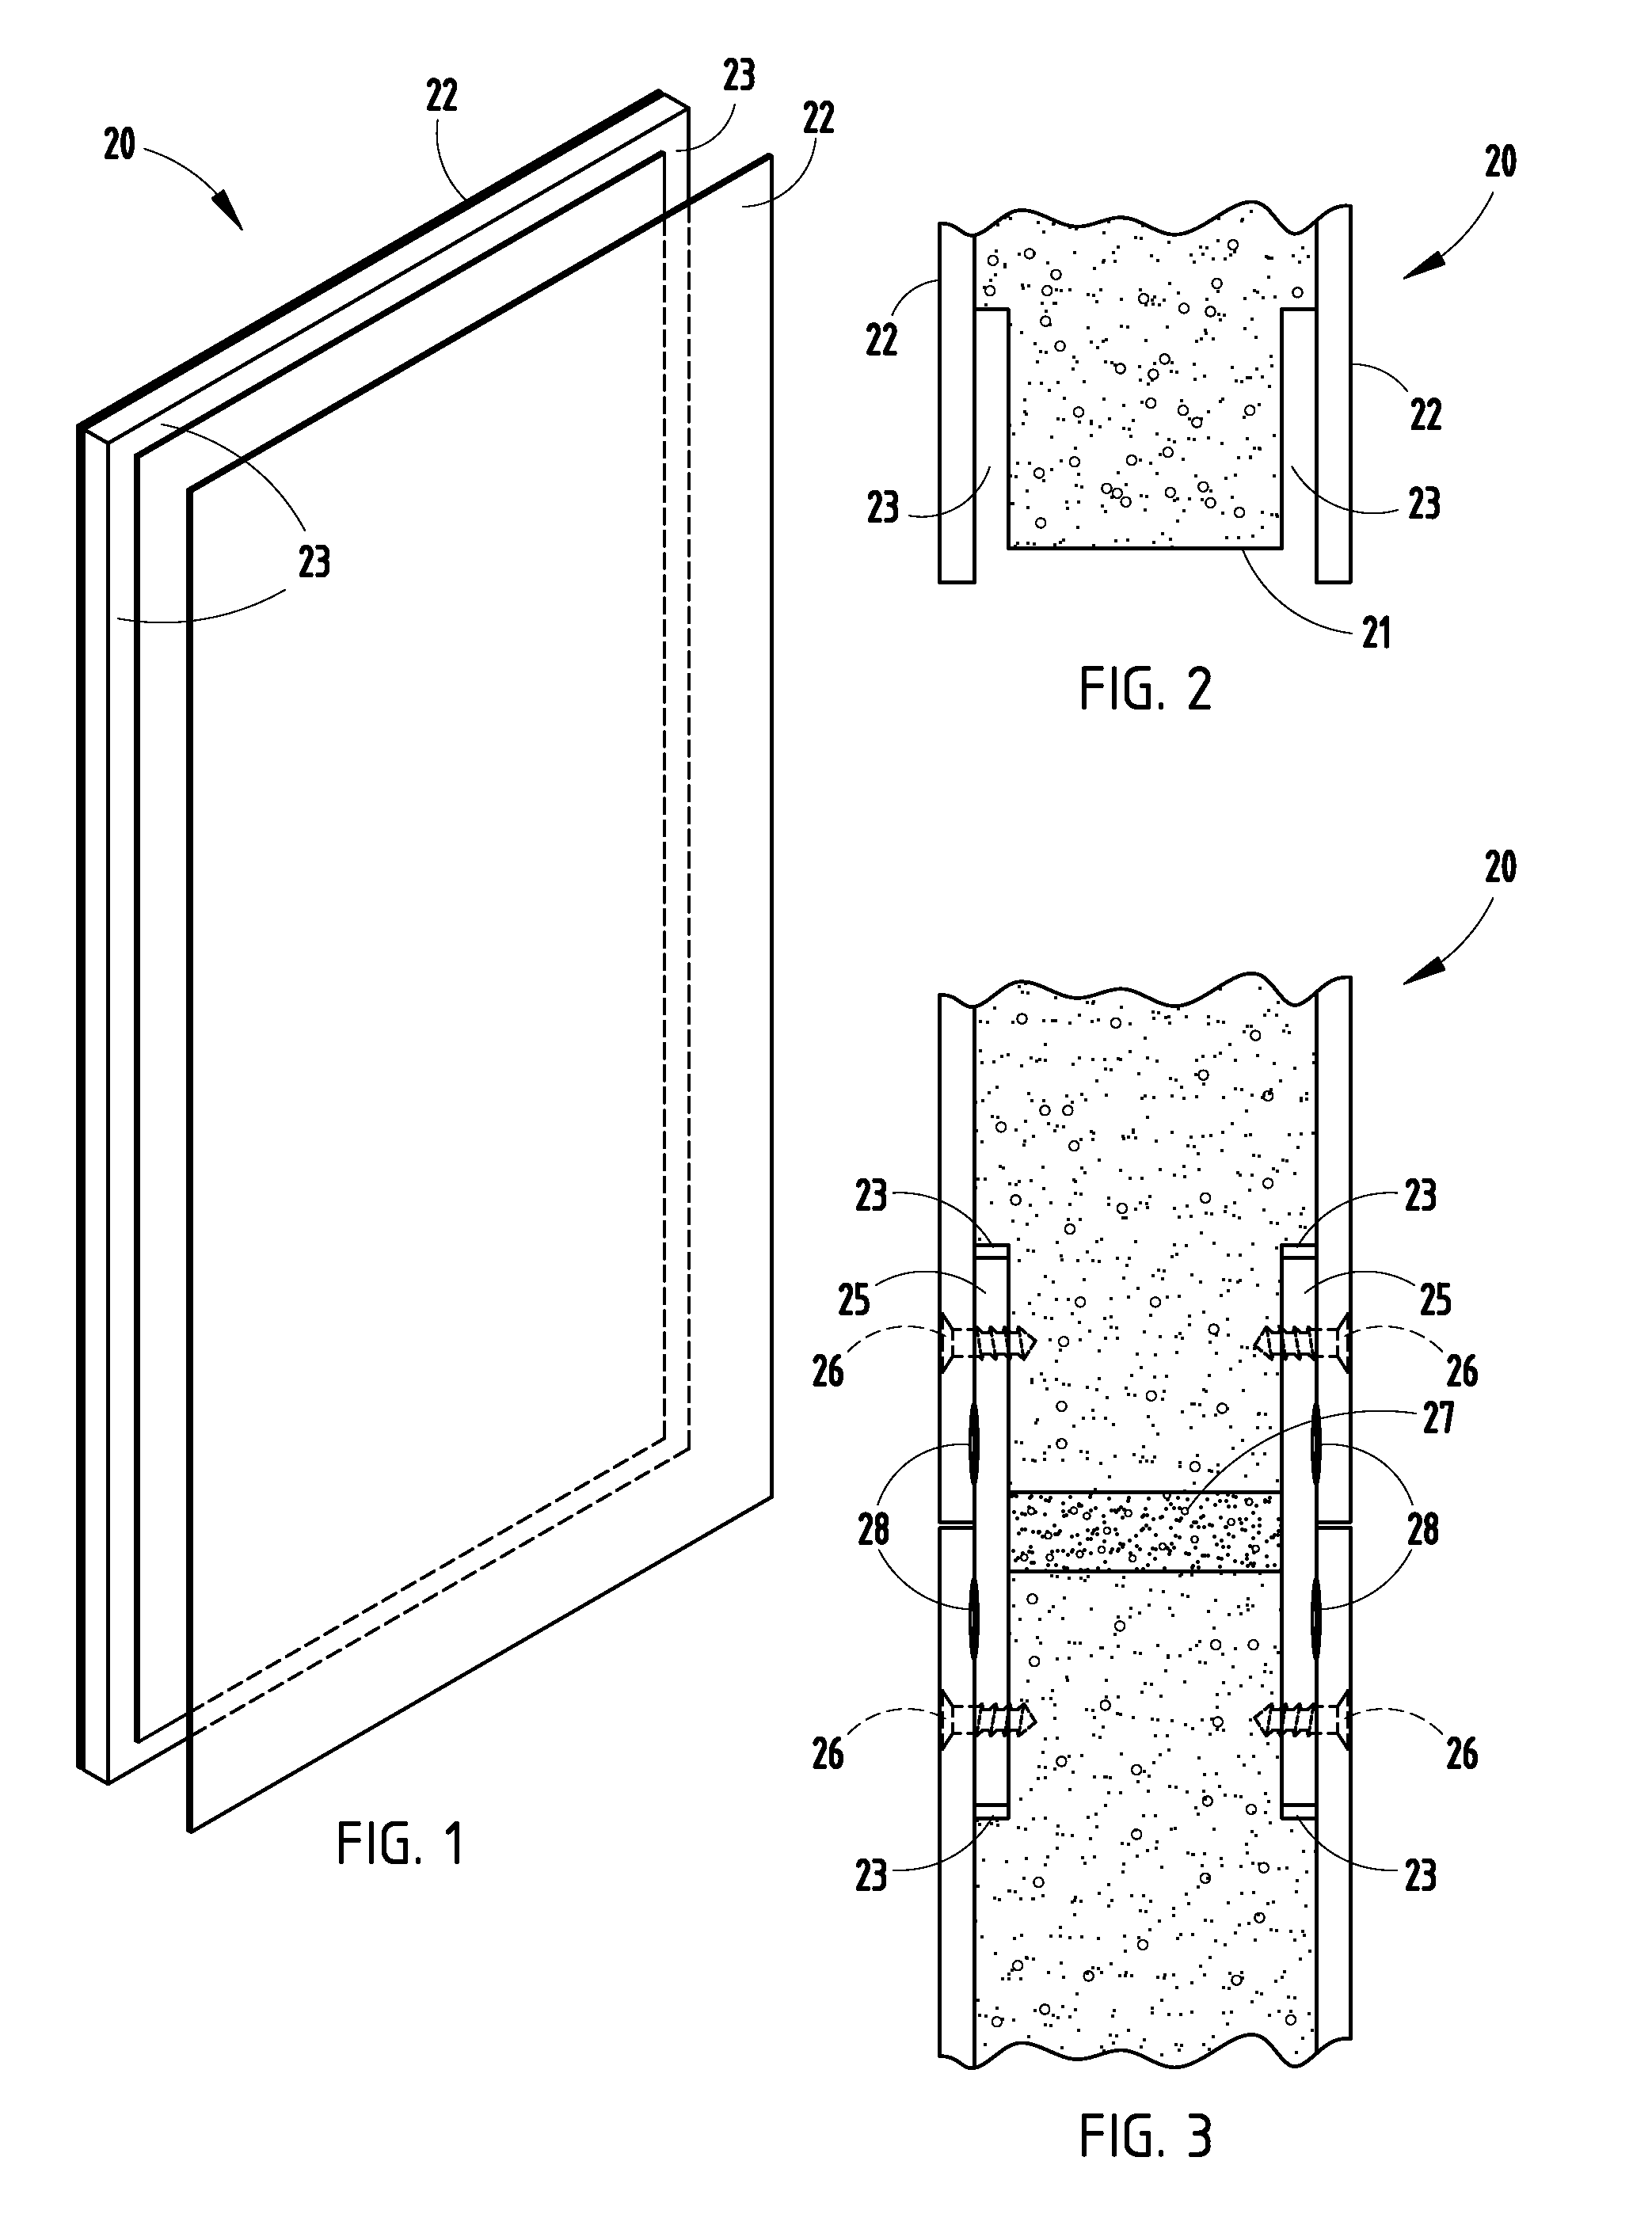 Structural insulated panel system including junctures